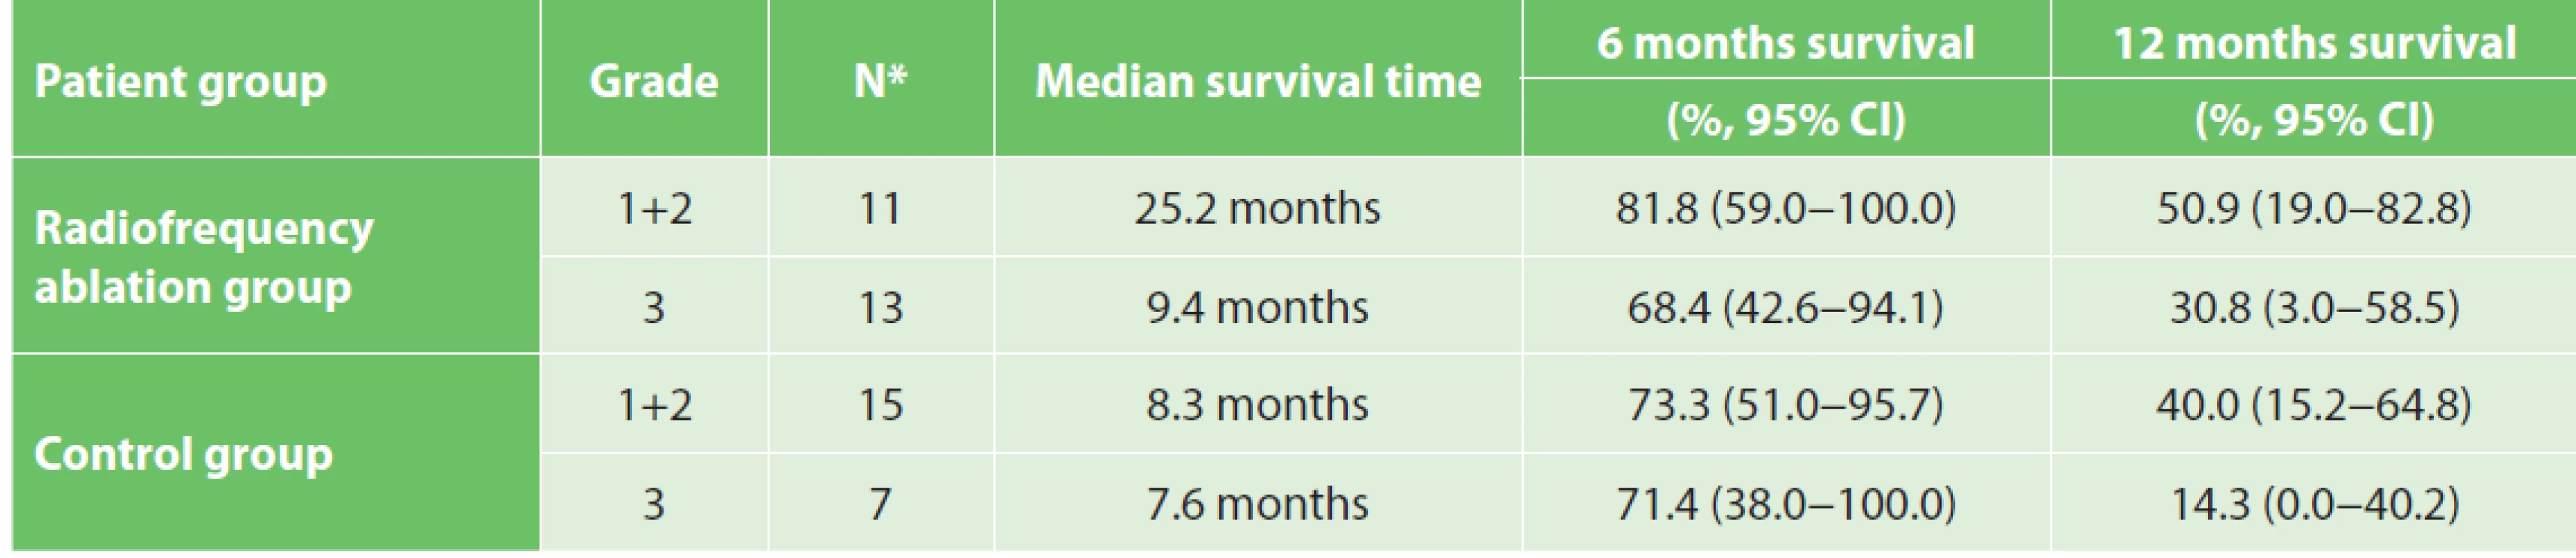 Median survival time and estimated probabilities of survival up to 6 and 12 months in the RFA (n=24) and control
groups (n=24) in relation to the tumour grade